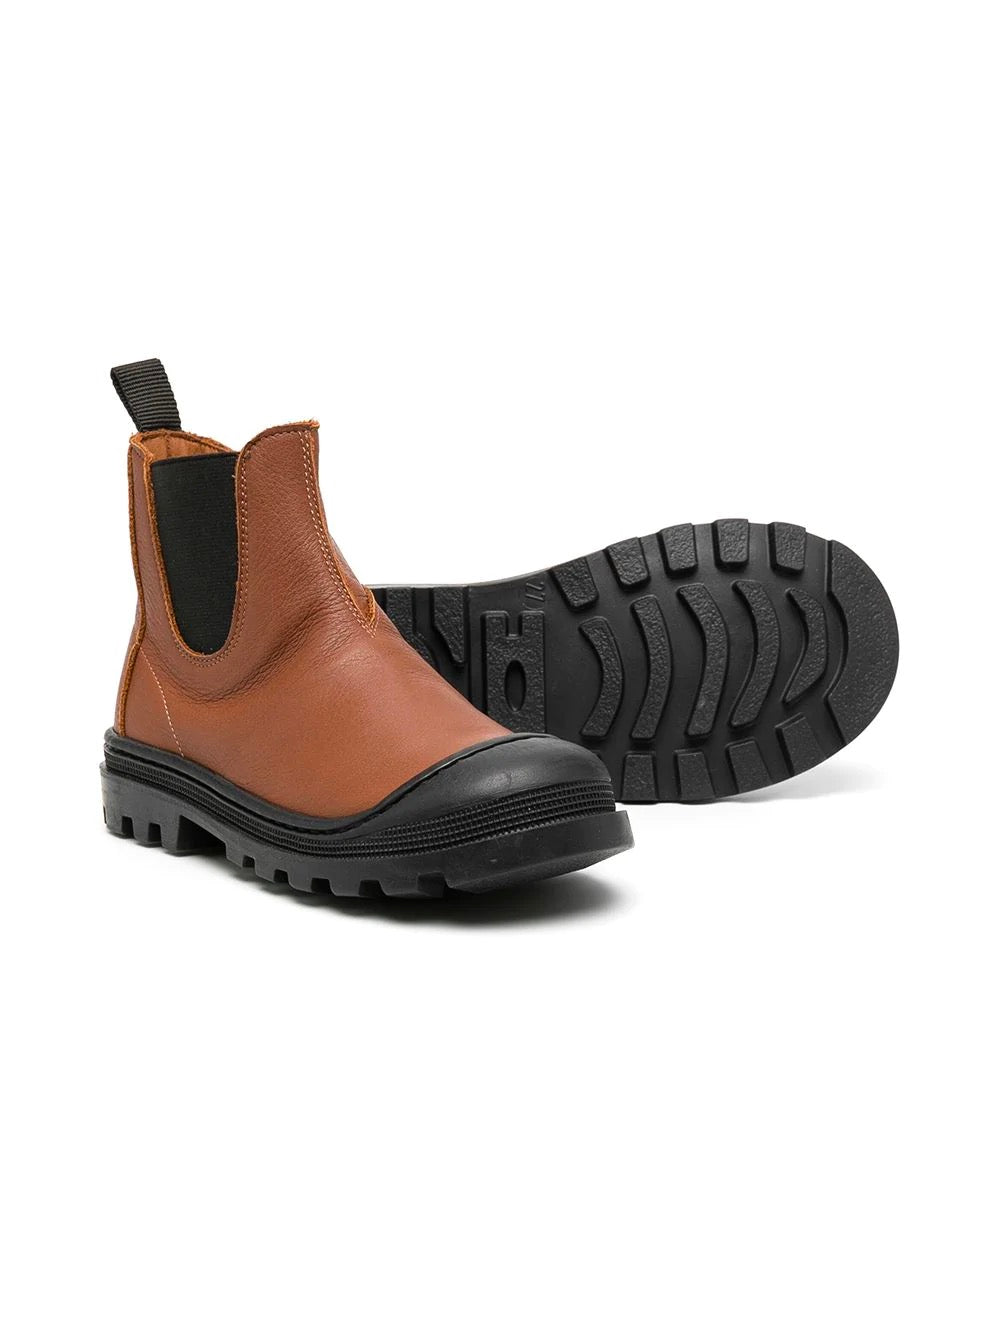 Boys & Girls Brown Leather Boots